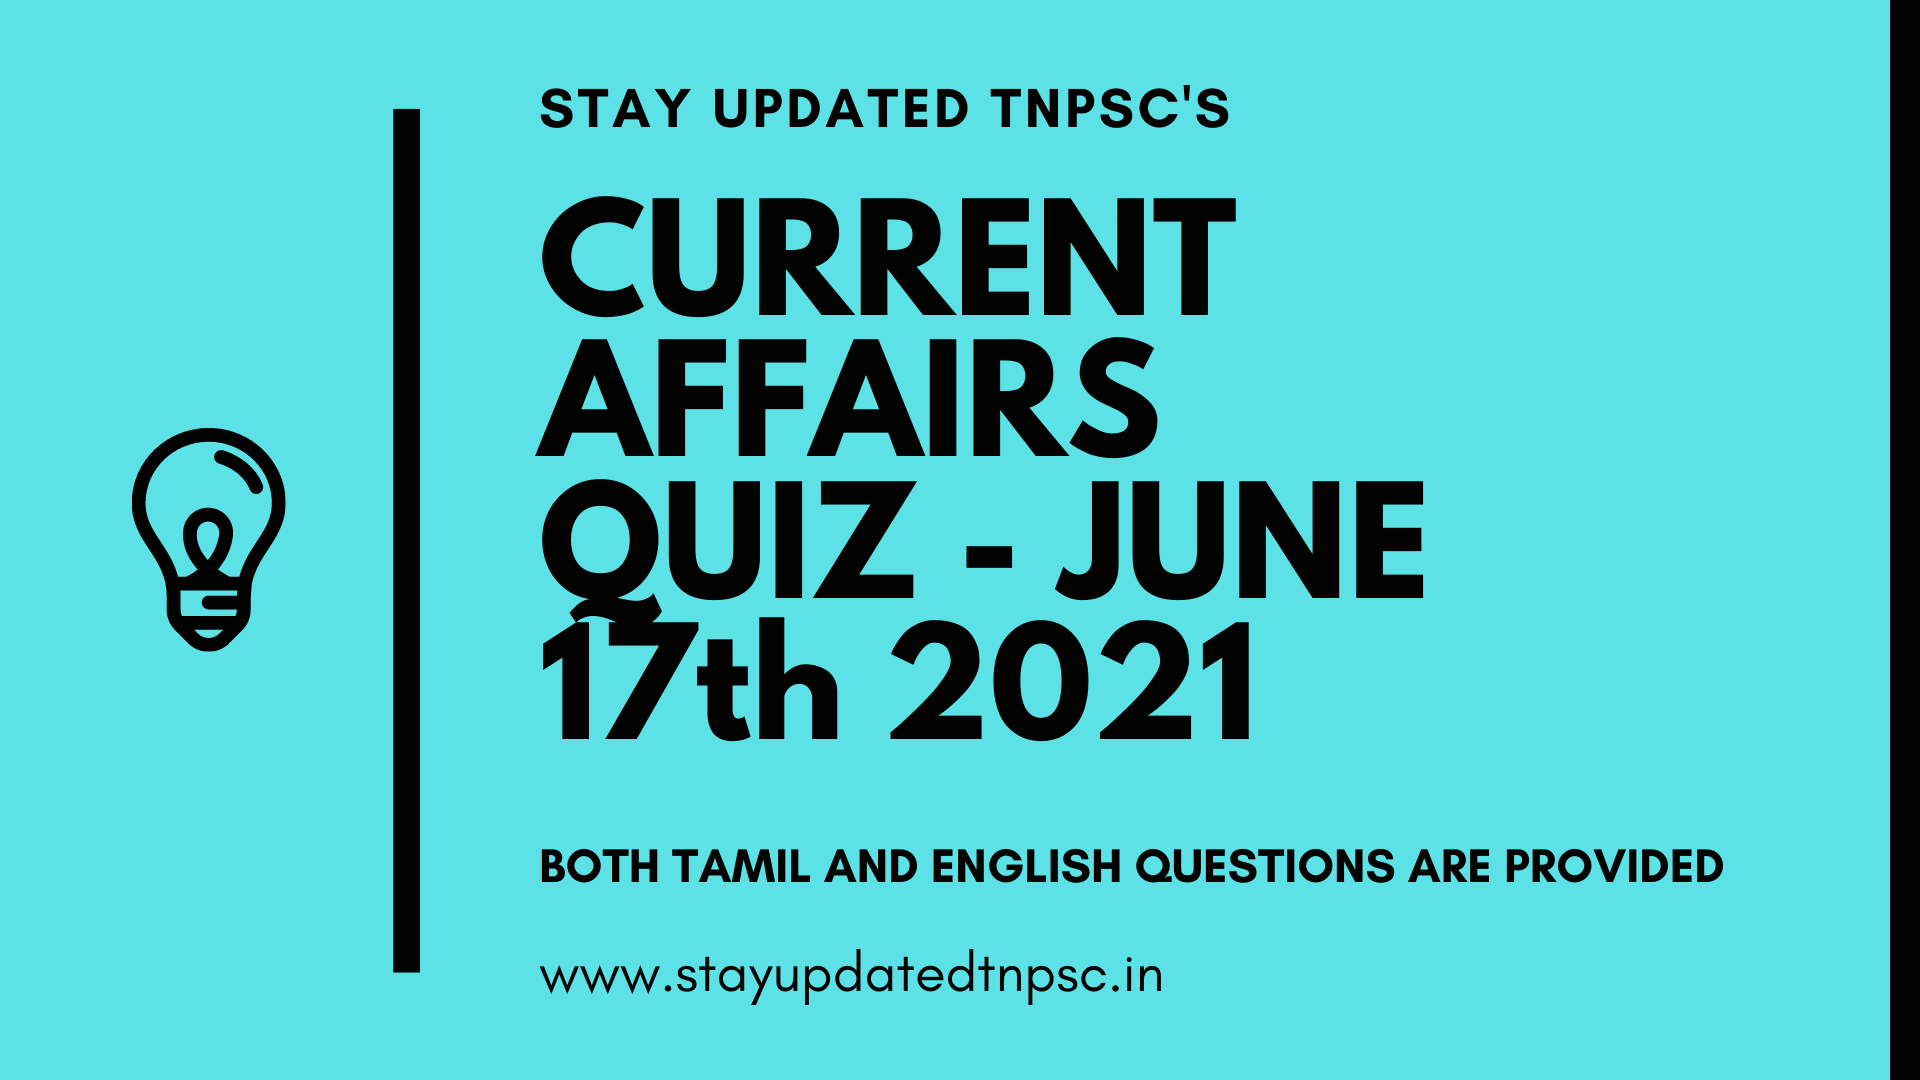 TNPSC DAILY CURRENT AFFAIRS: 17 JUNE 2021